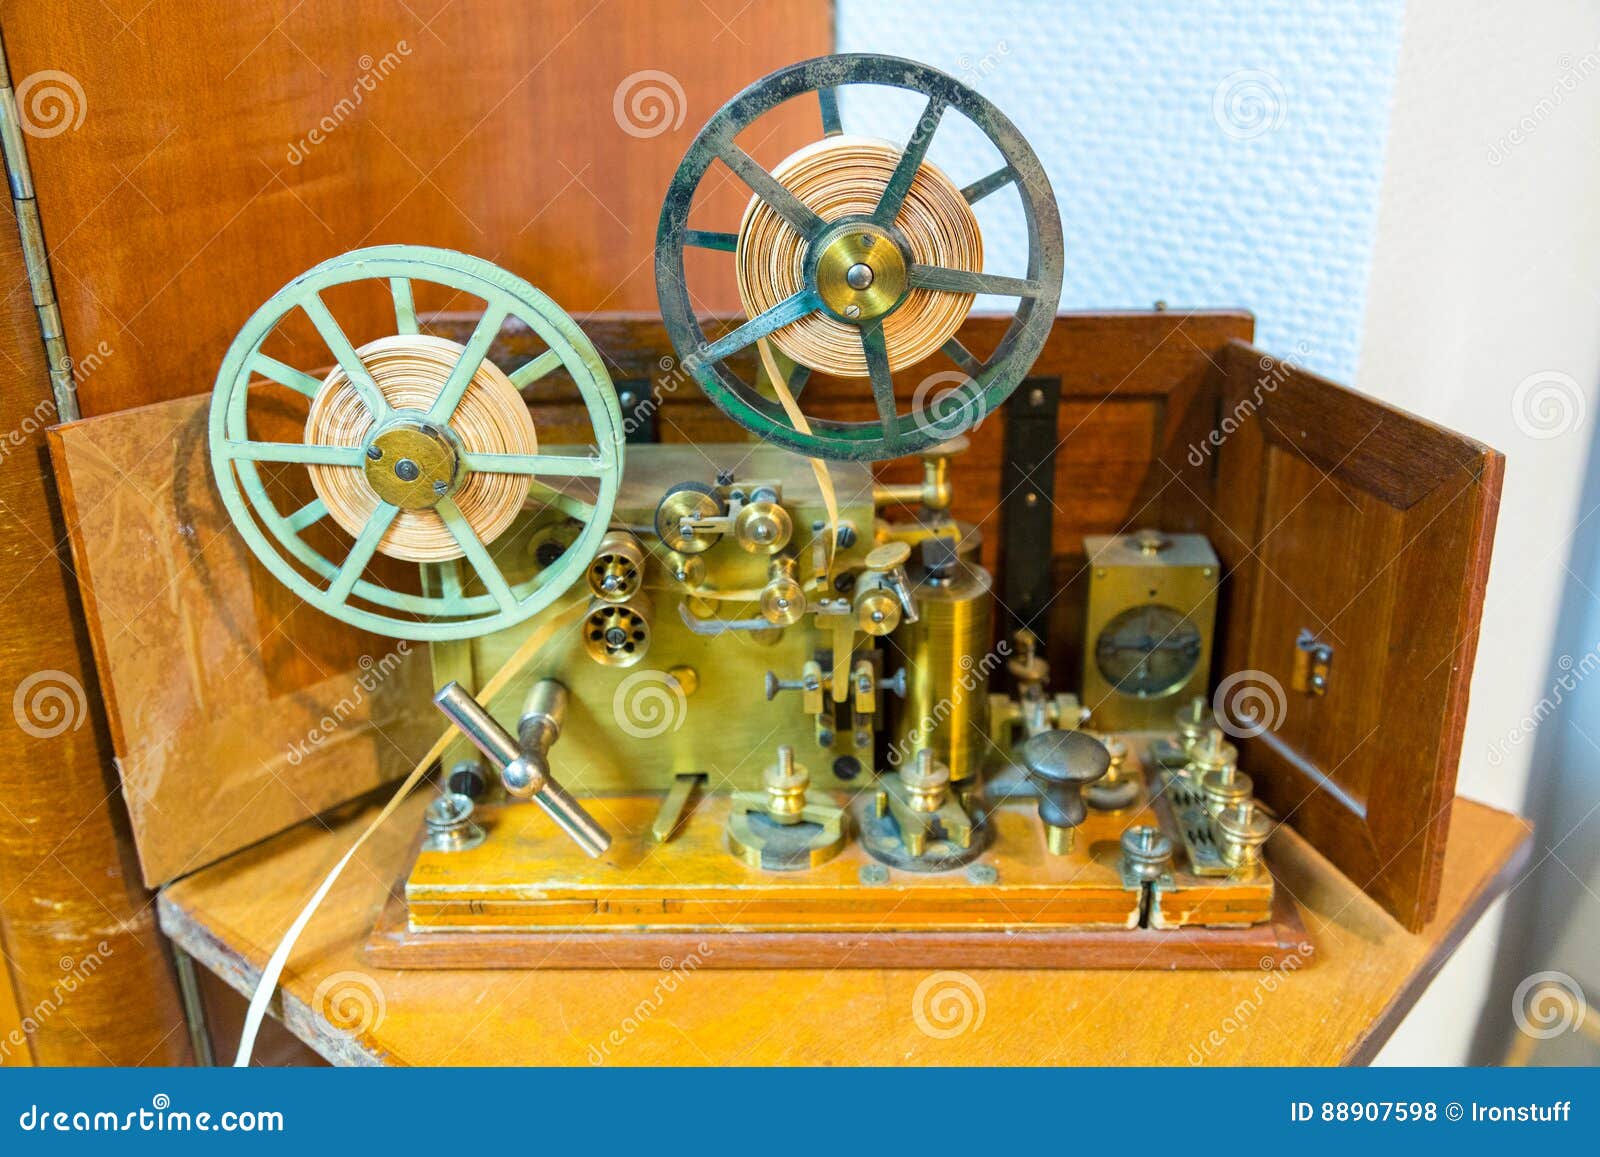 Morse electric telegraph stock photo. Image of wooden - 88907598